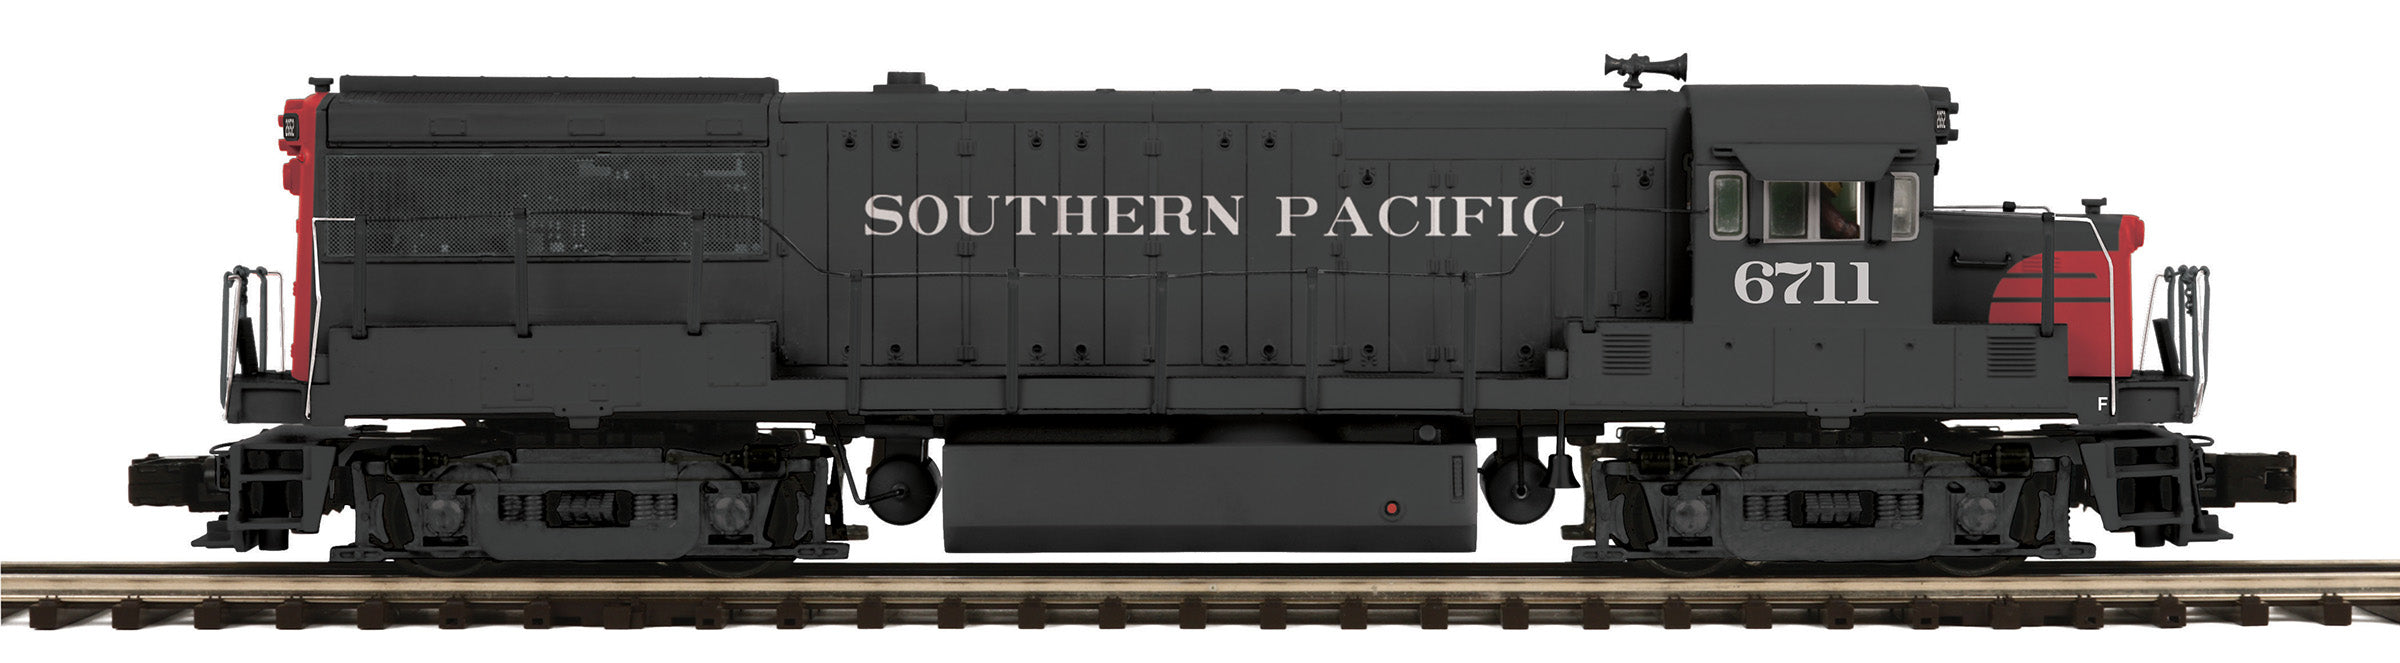 MTH 20-21841-1 - U25B Diesel Engine "Southern Pacific" #9711 w/ PS3